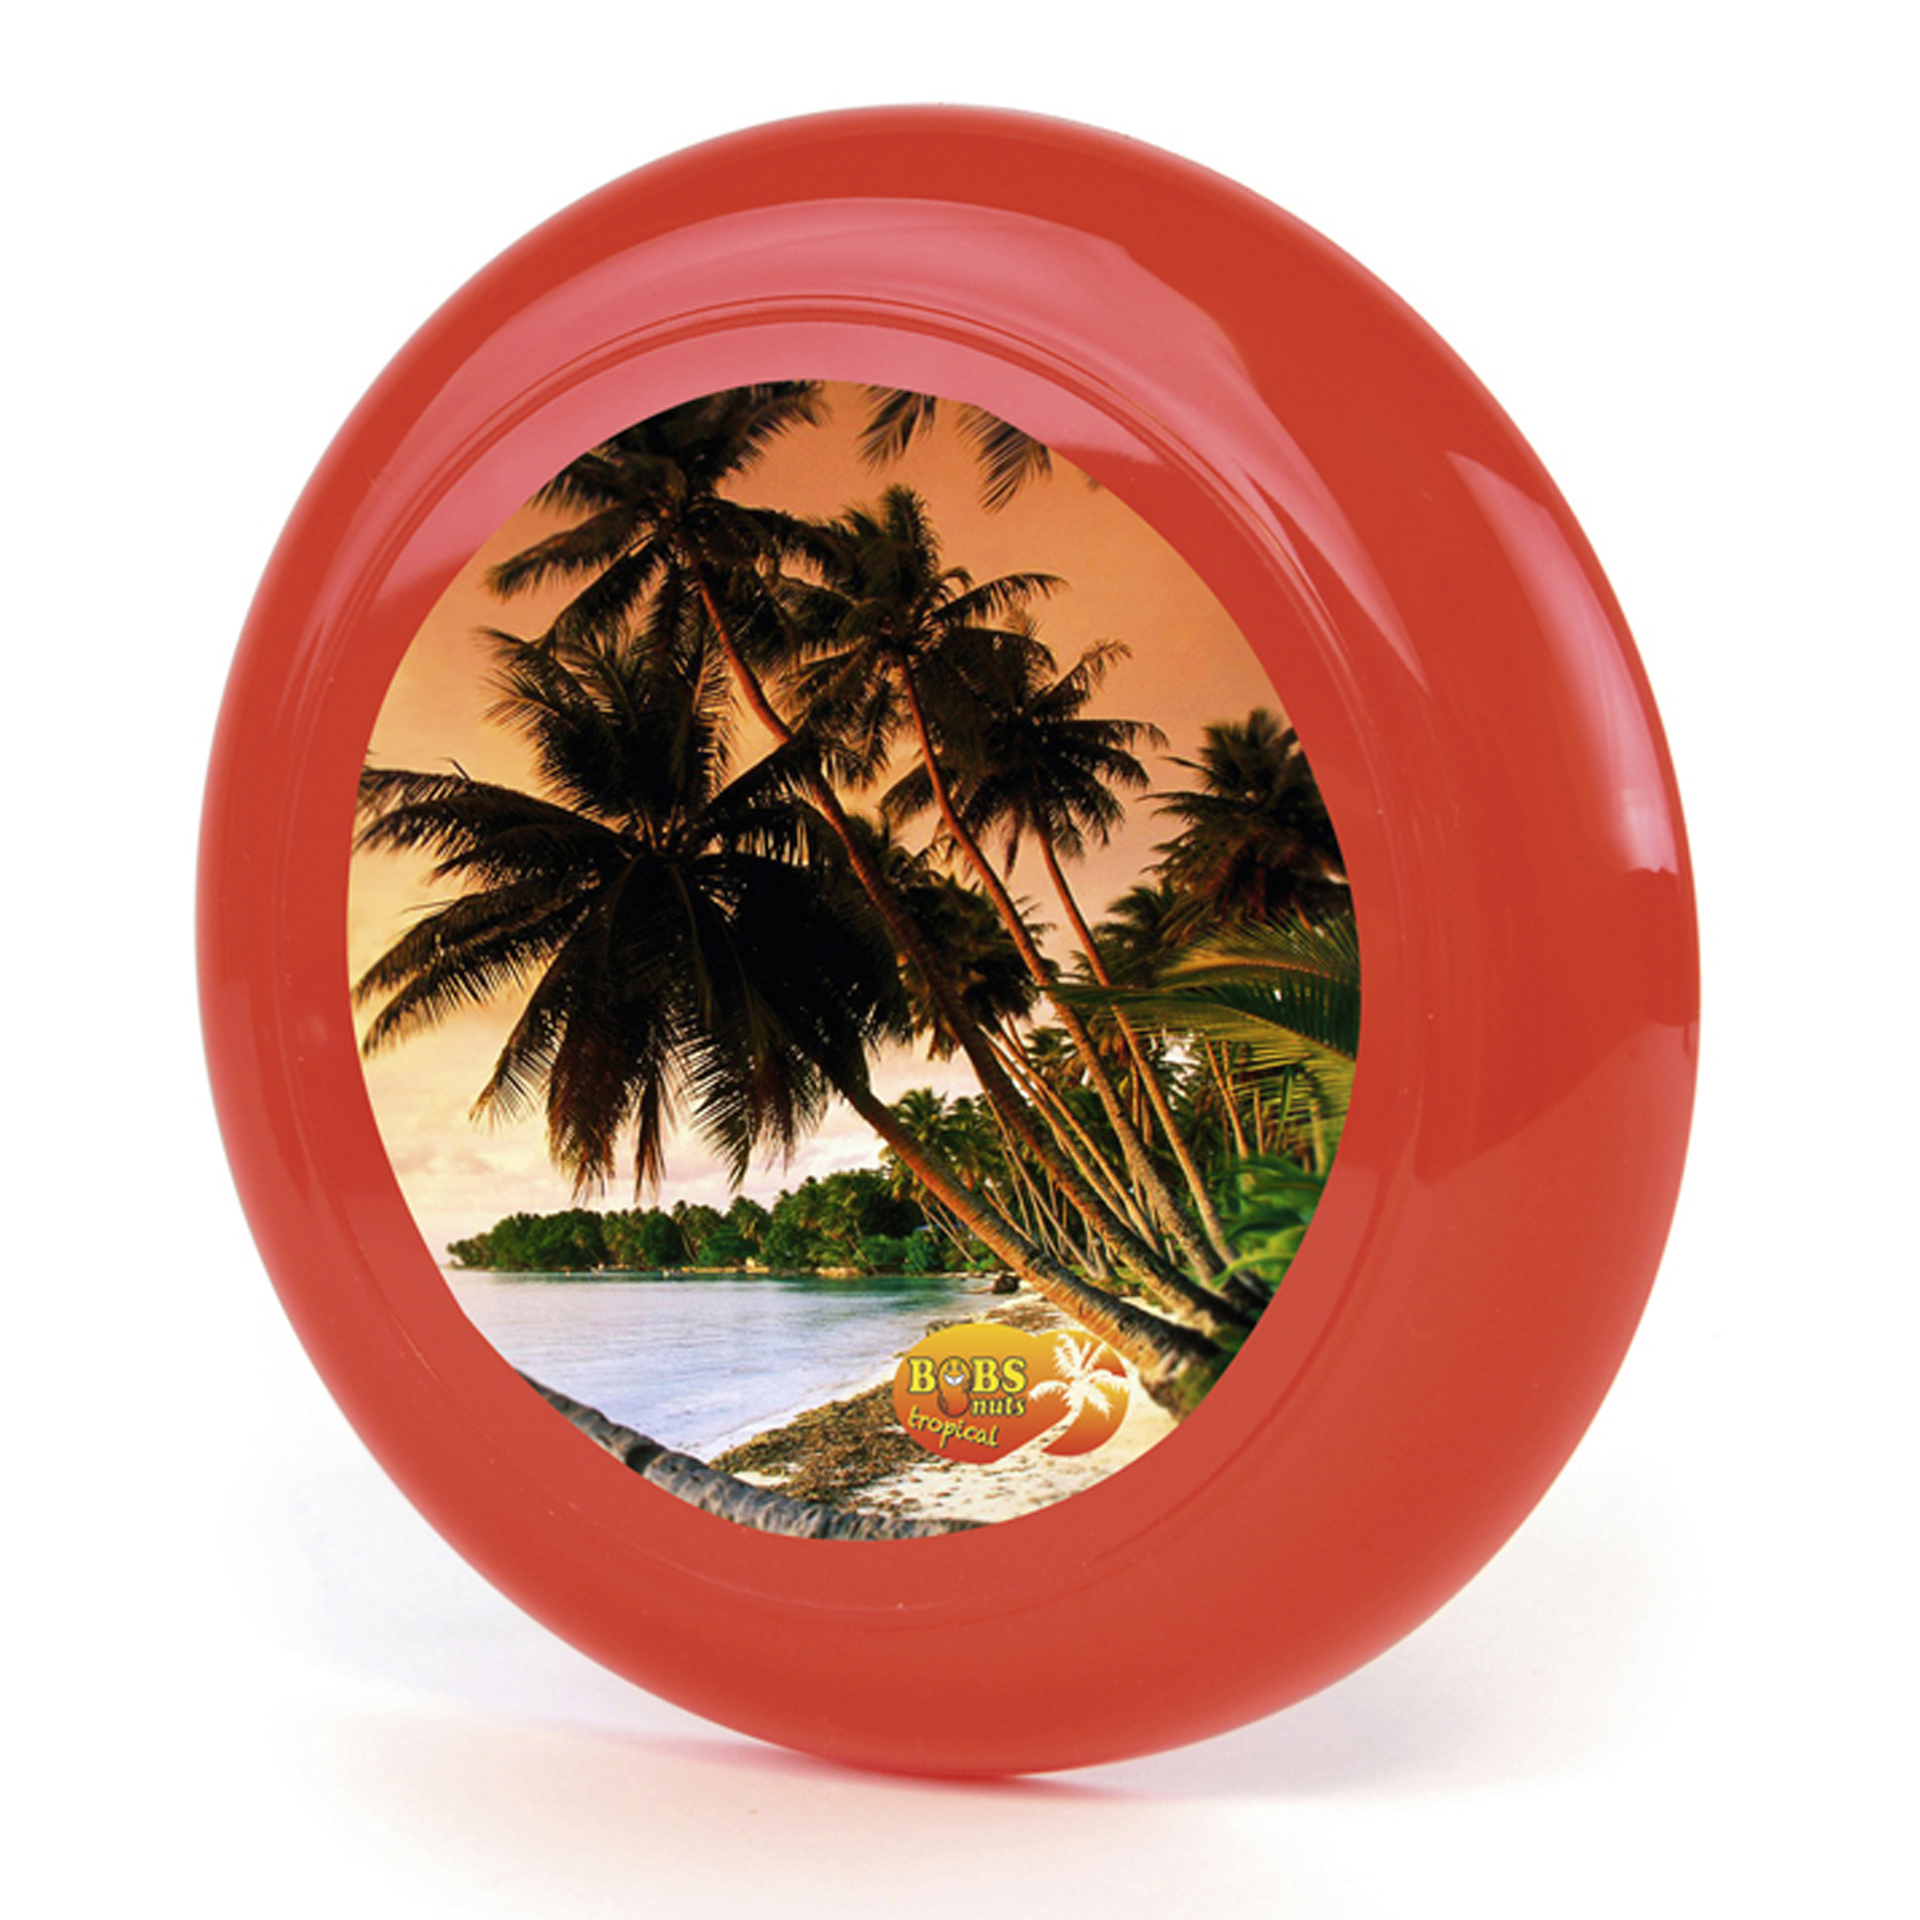 Low Cost Frisbee in red with digital print